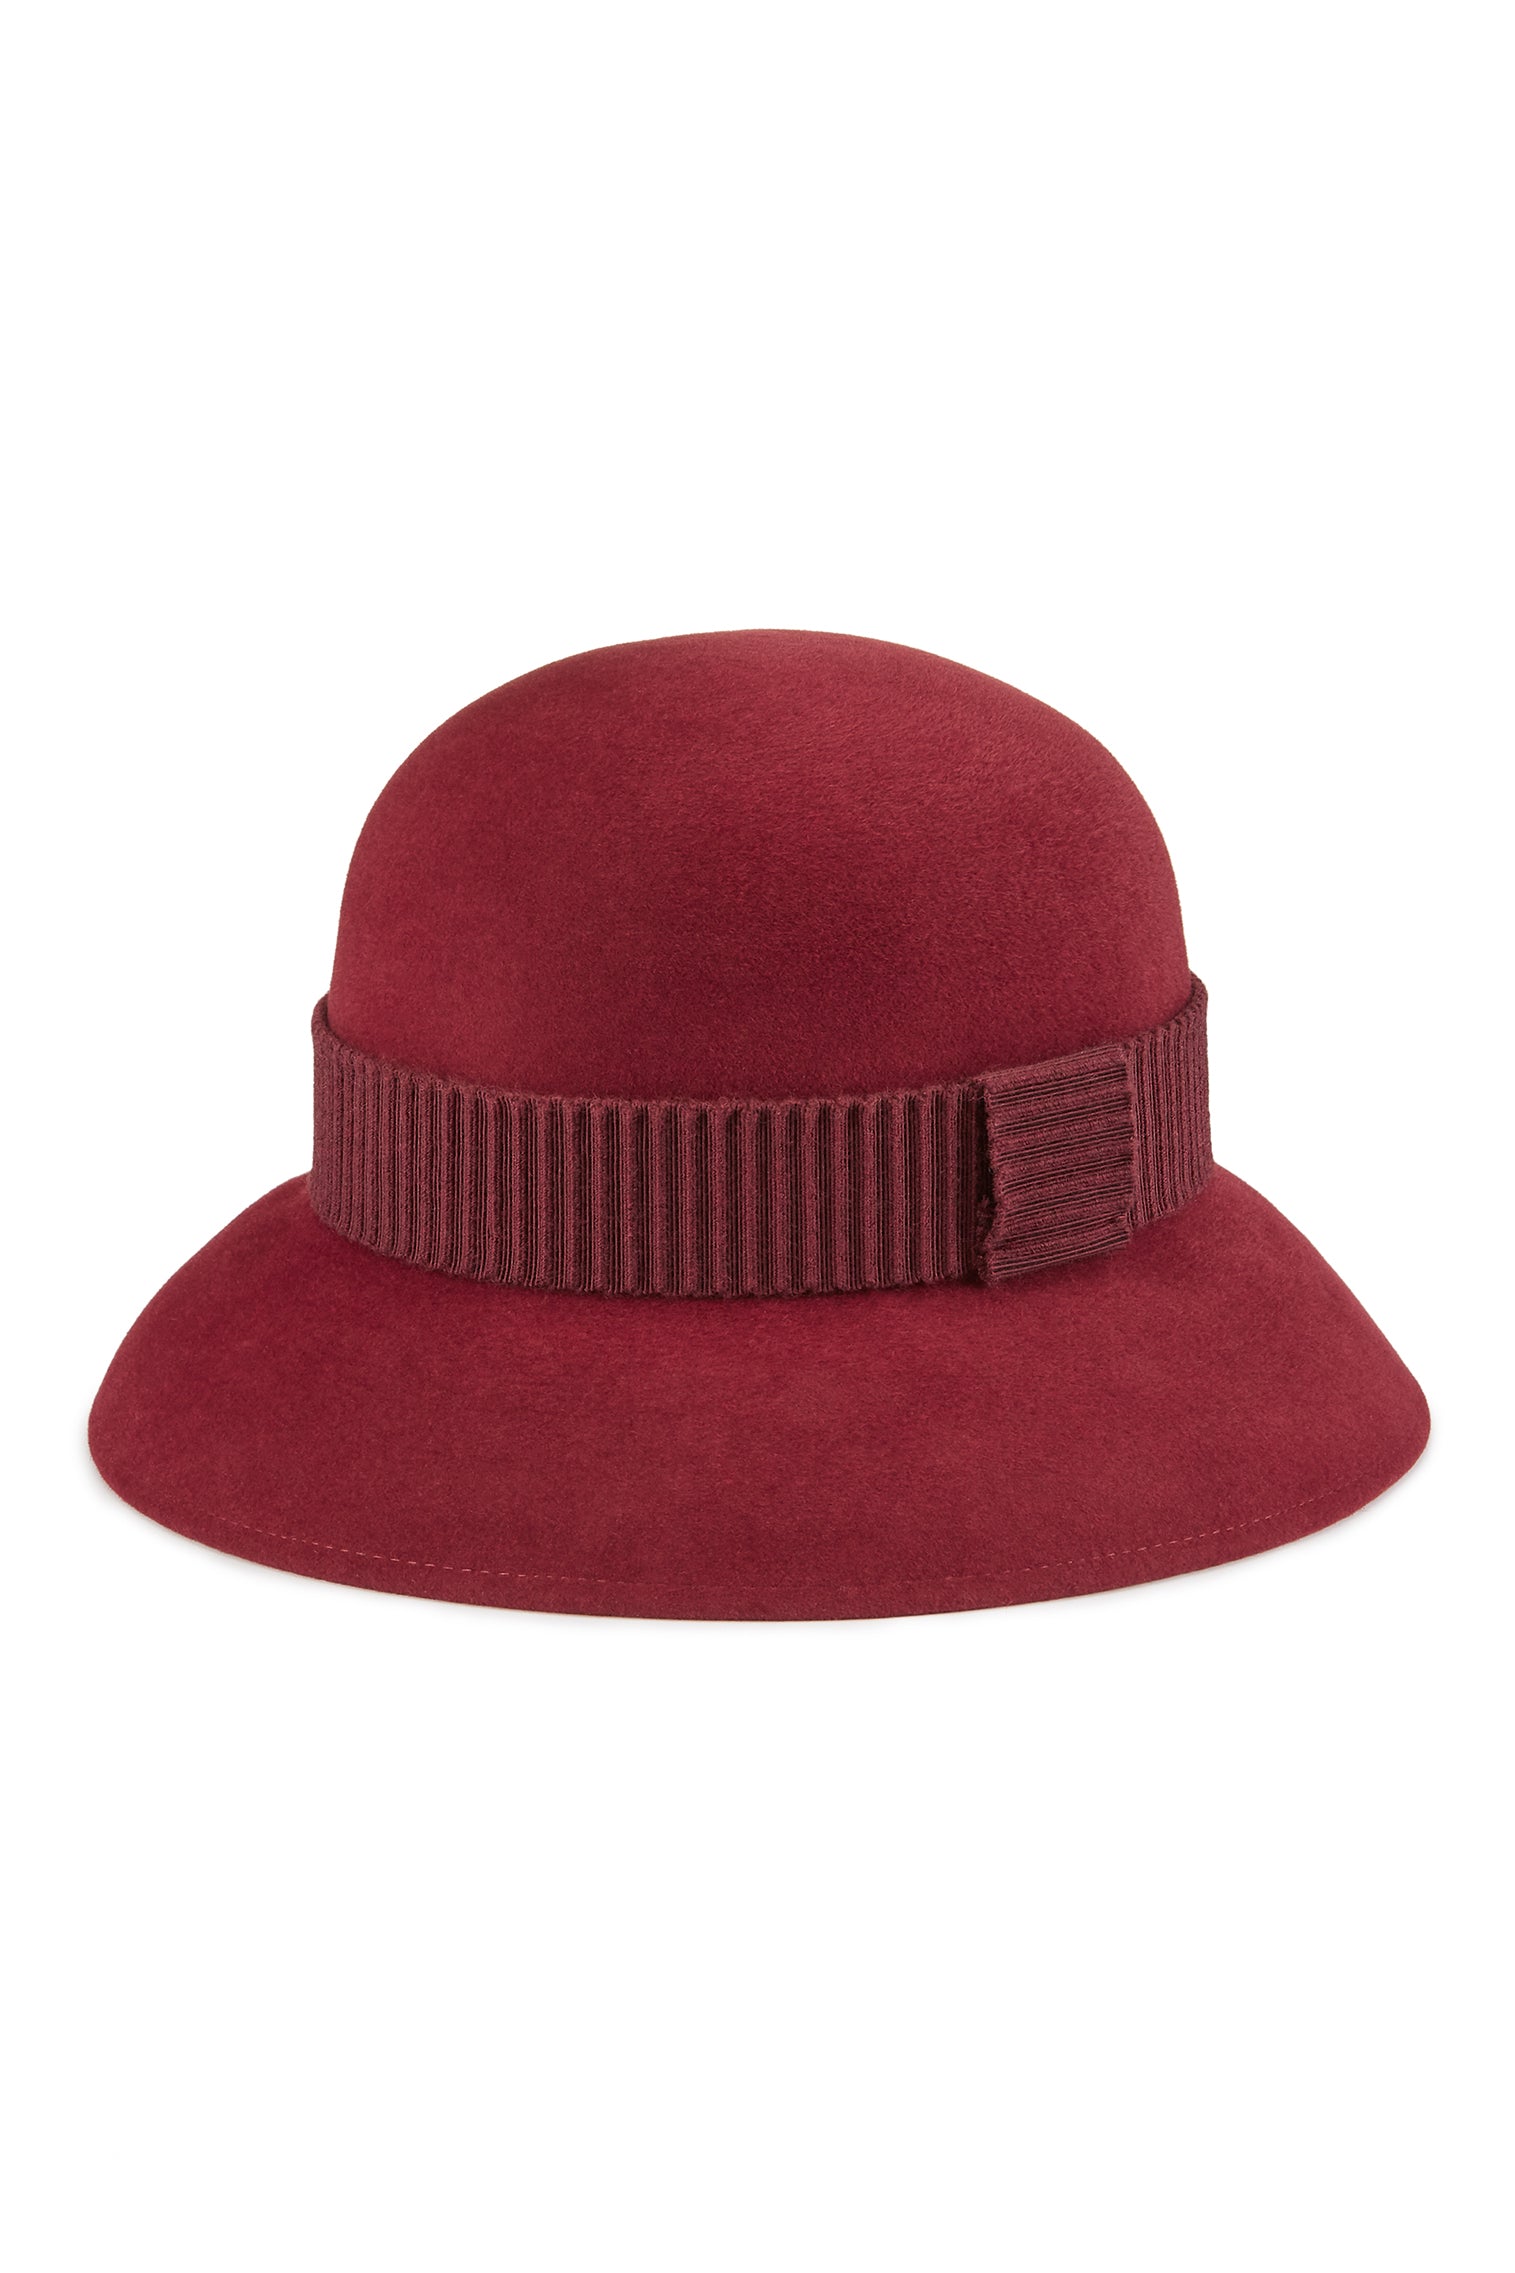 Hogarth Cloche - Products - Lock & Co. Hatters London UK